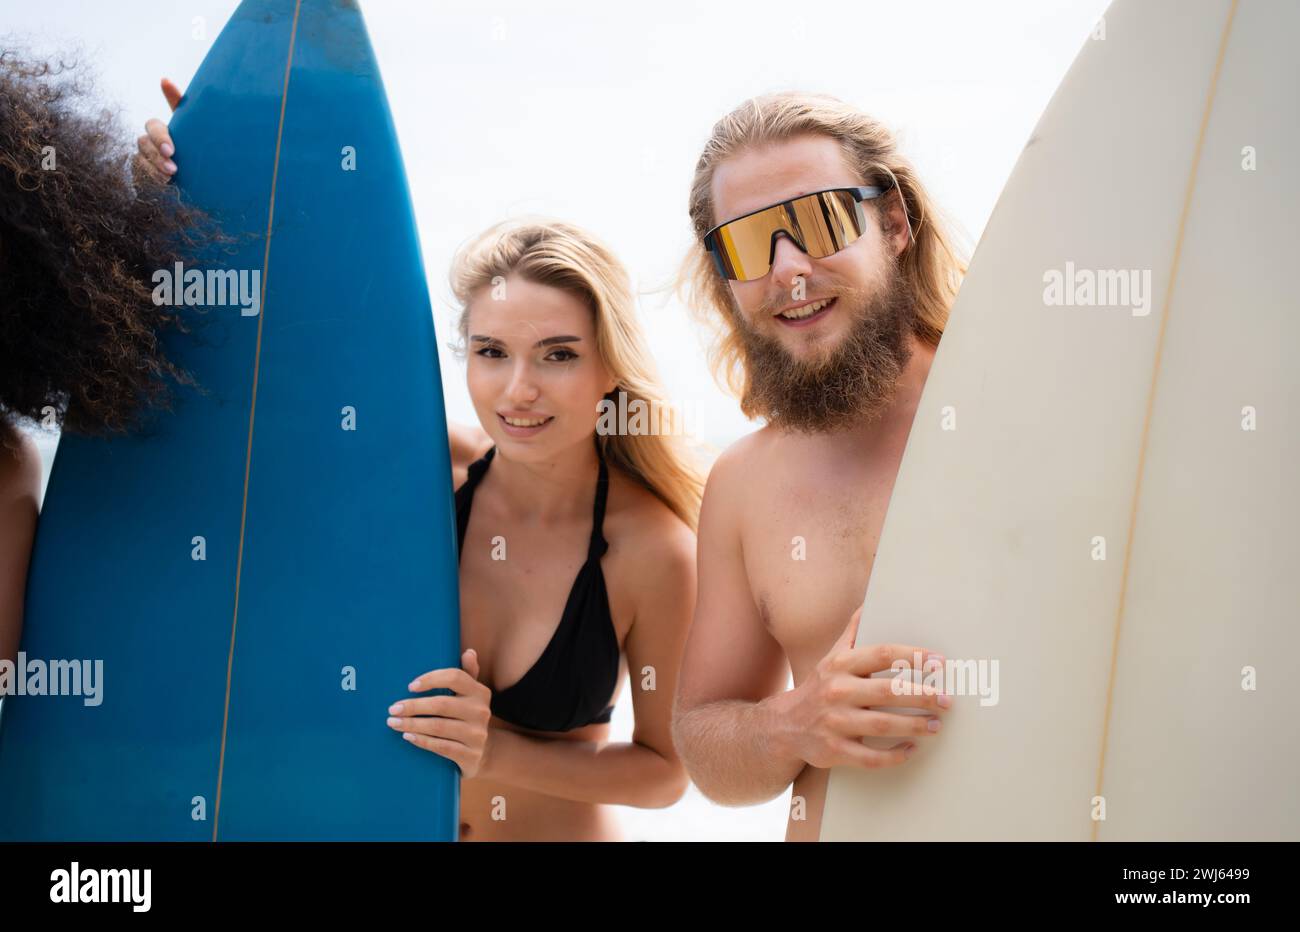 Portrait of smiling young woman in bikini with surfboard at beach Stock Photo